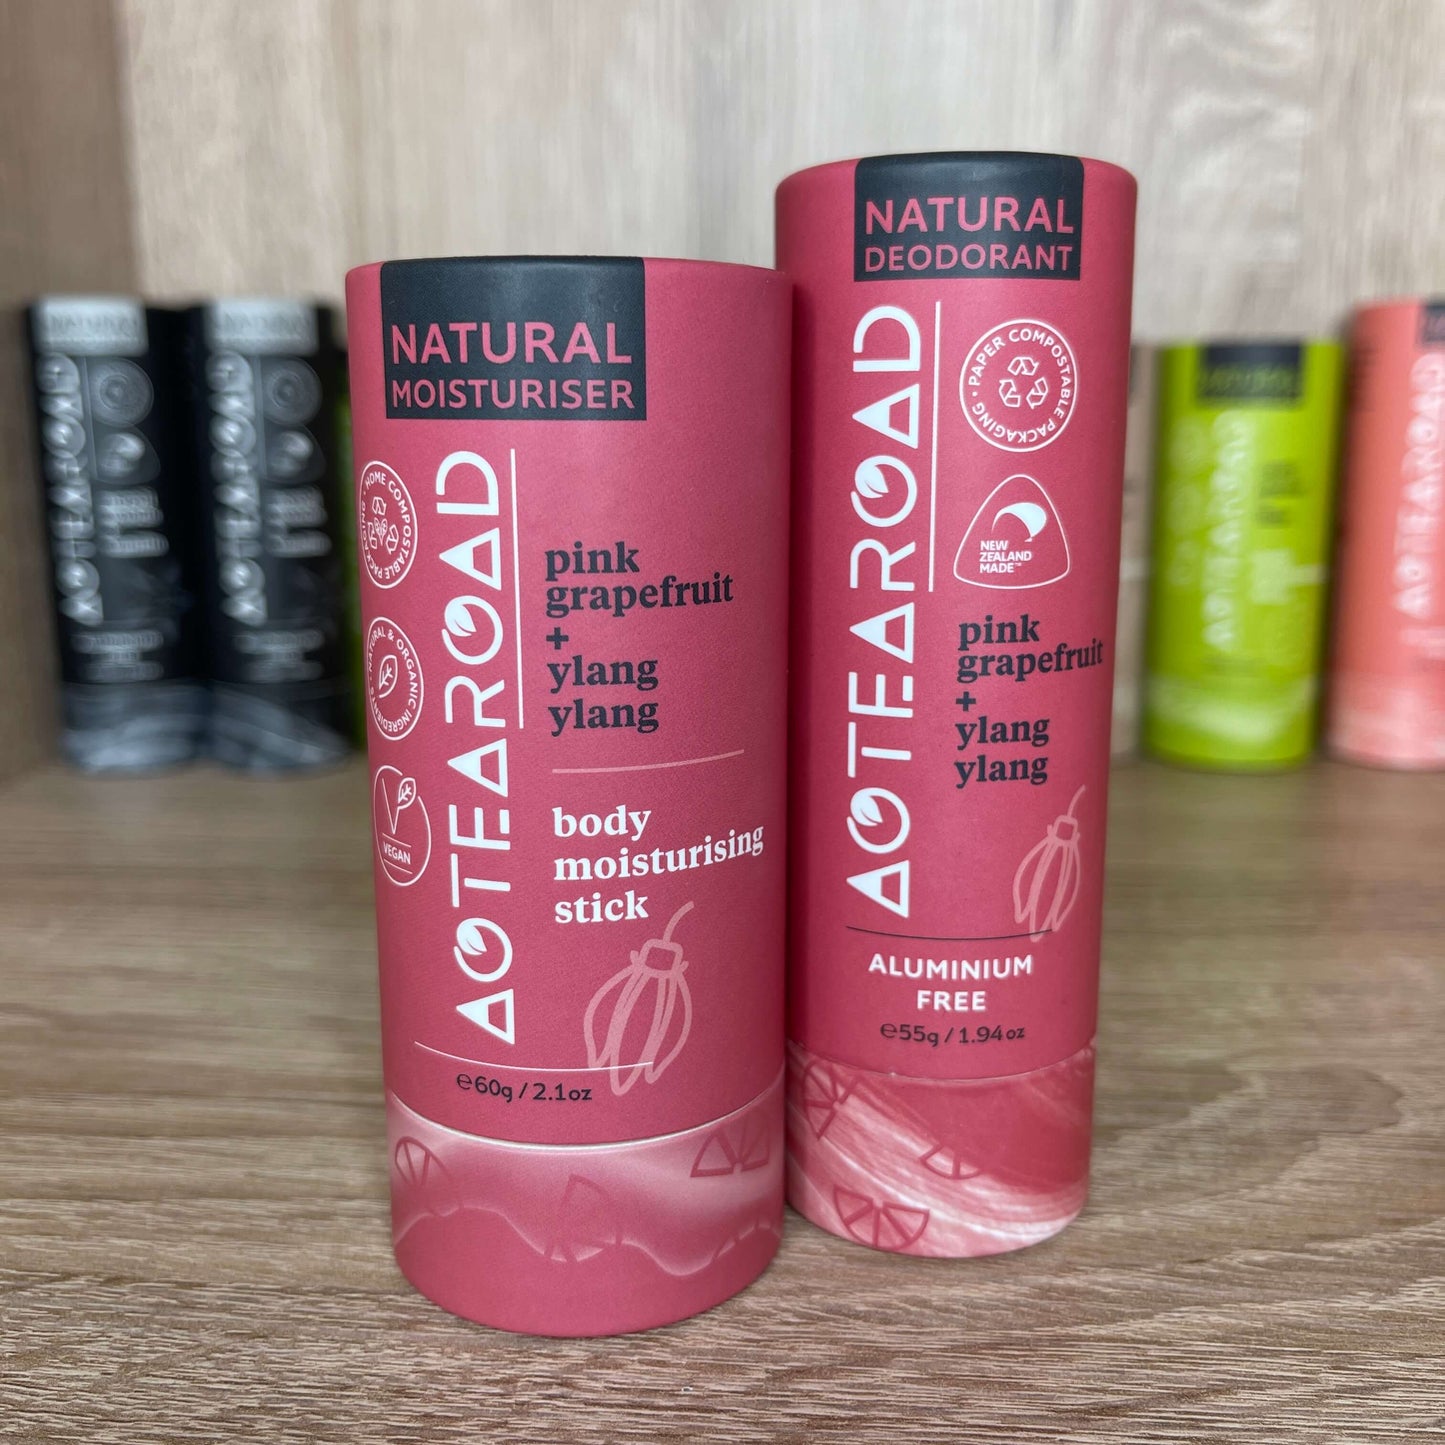 Natural deodorant and moisturiser sticks in pink grapefruit and ylang ylang scent by Aotea Road.